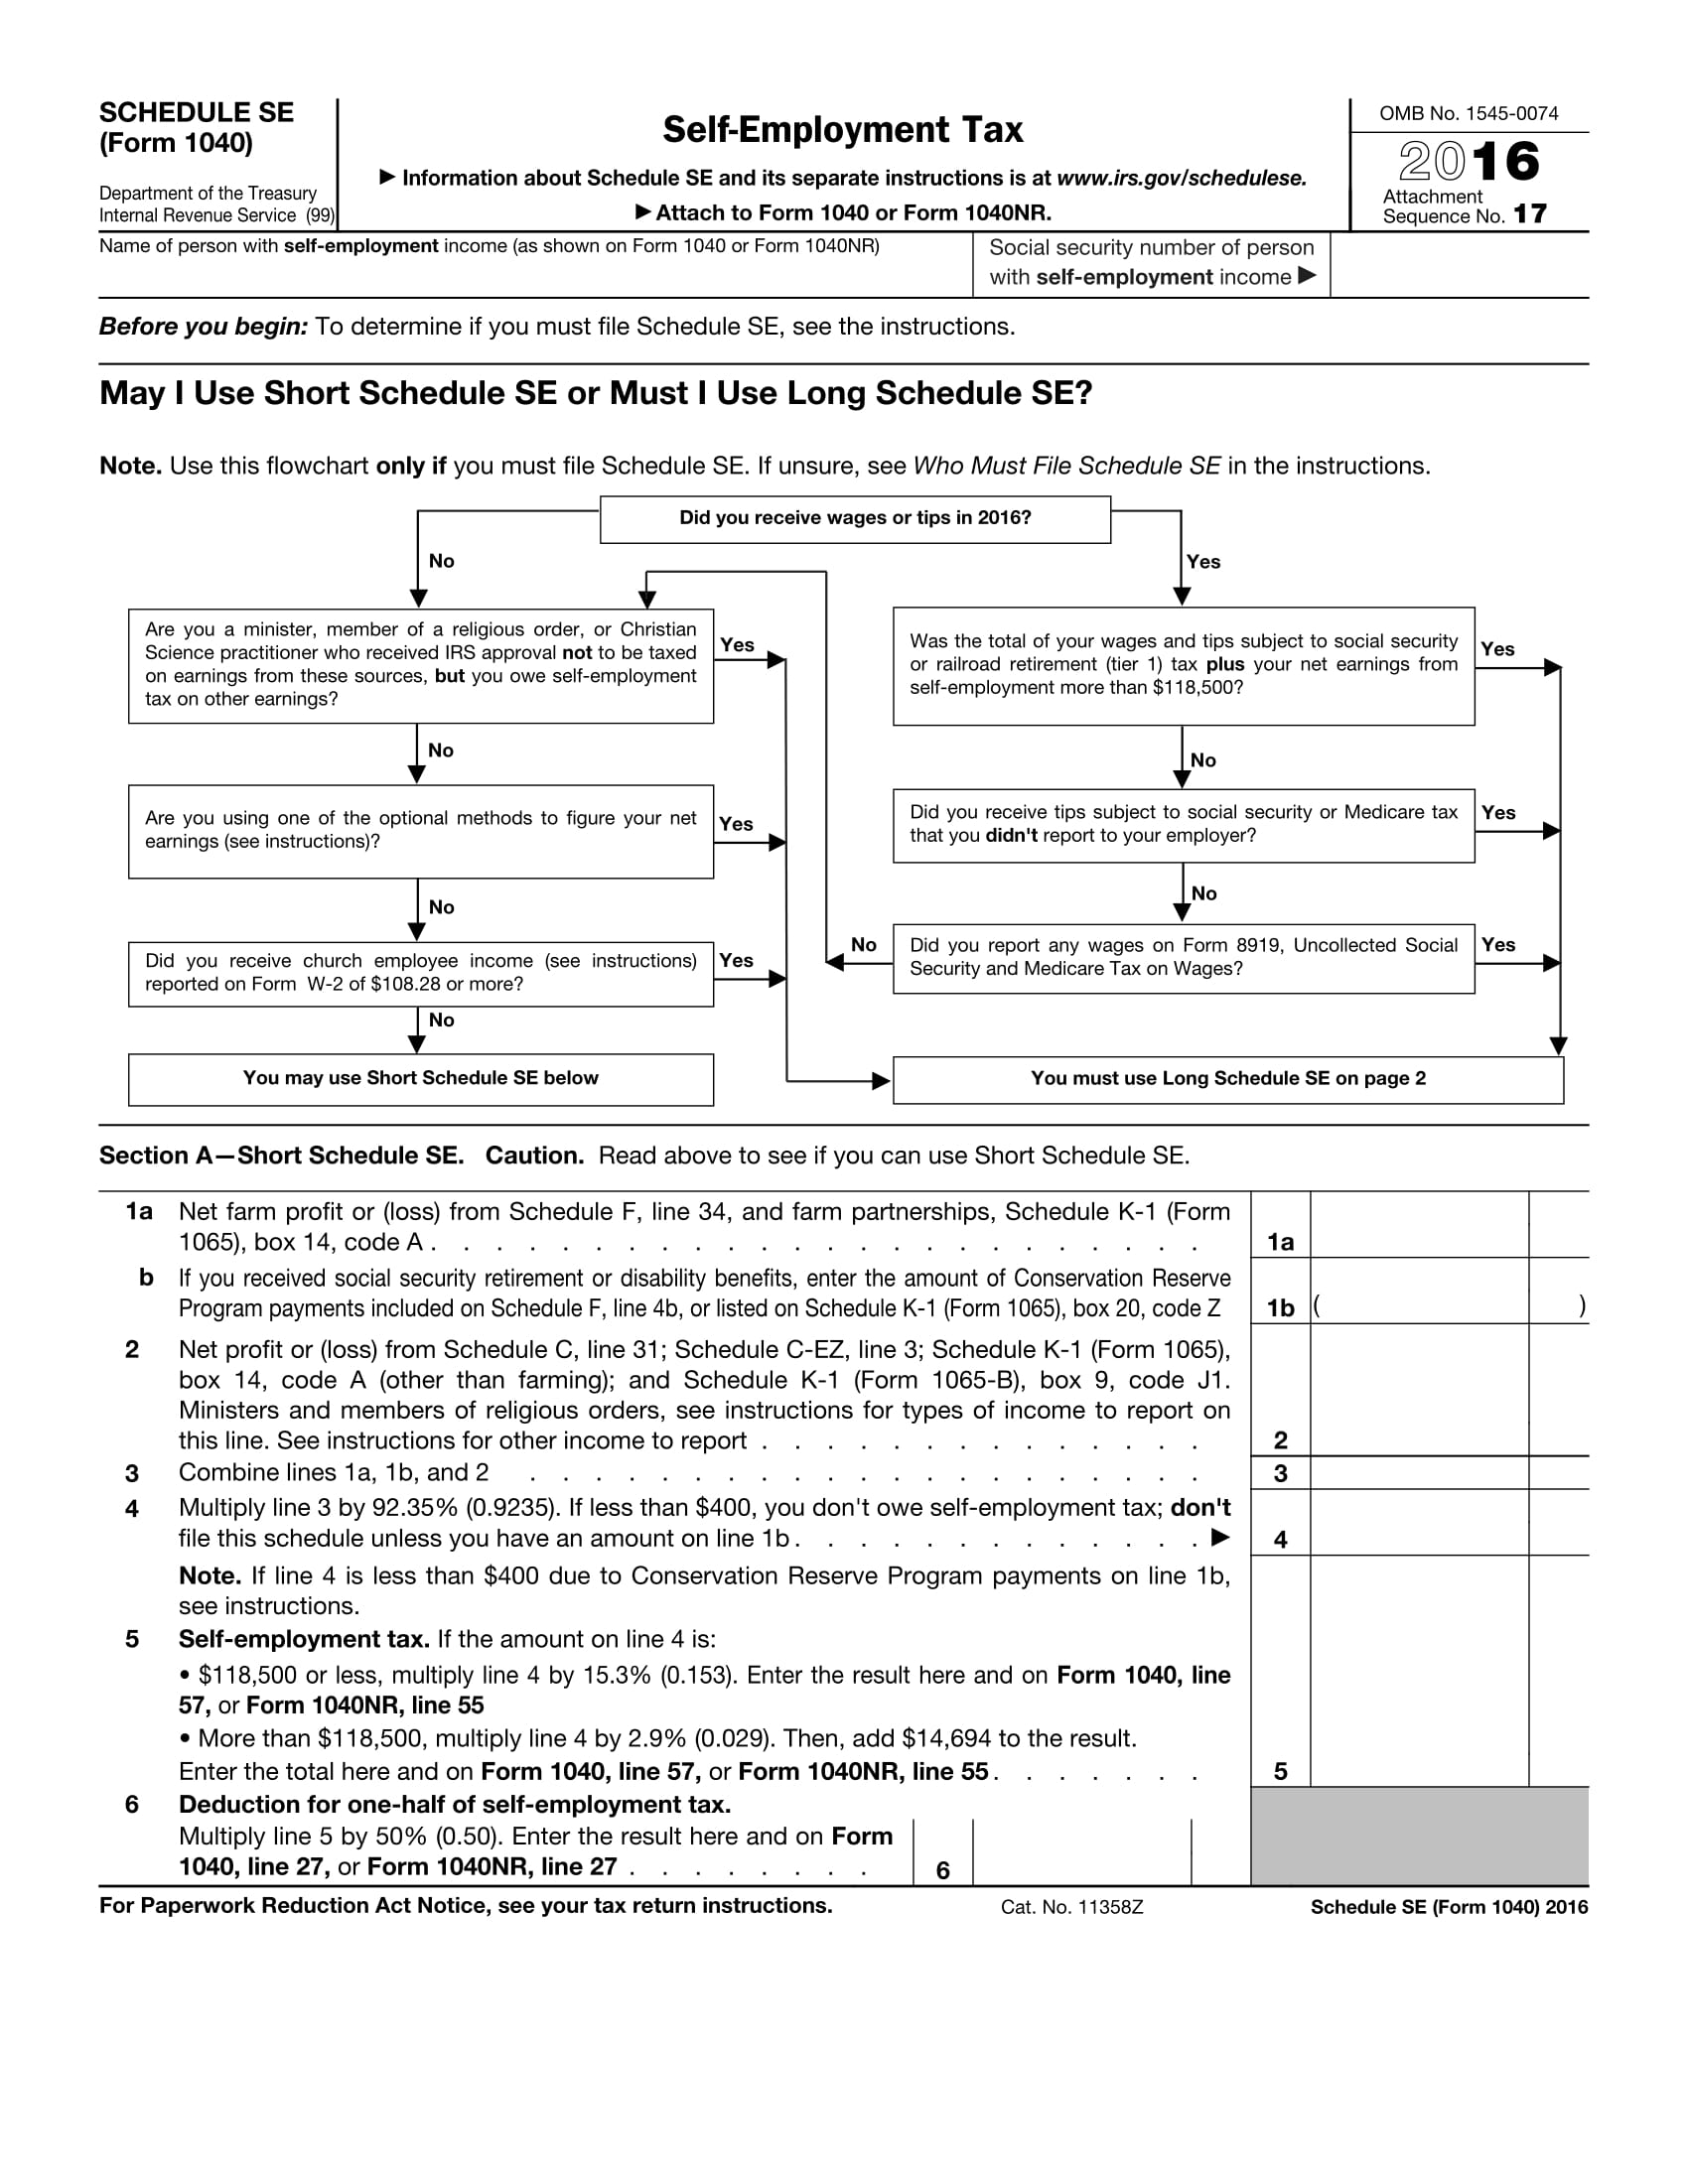 self employed income tax form 1